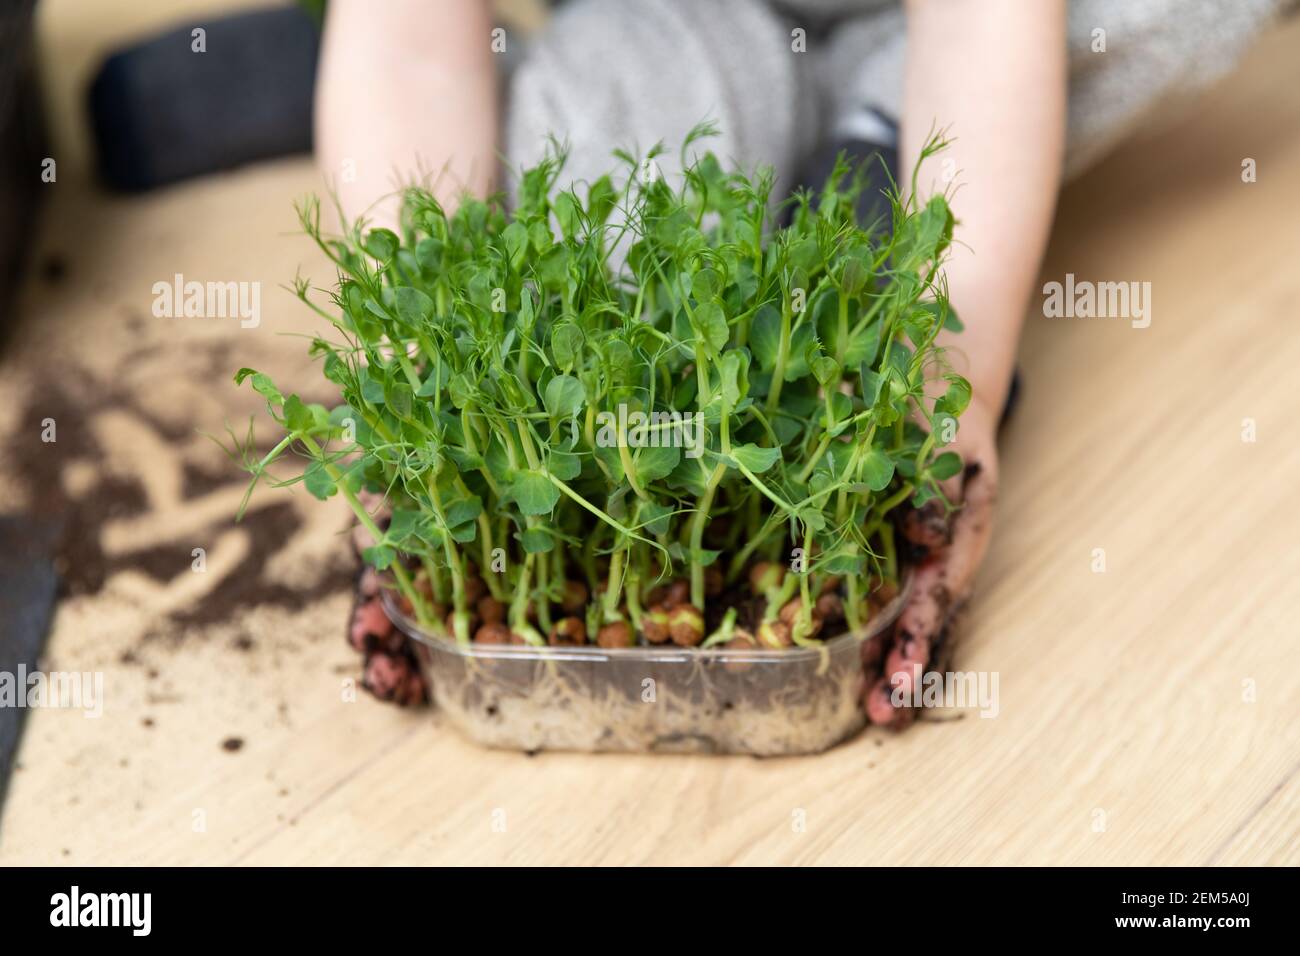 Young boy proud of growing seedlings. Showing peas with sprouts and visible roots. At home gardening learning botany. Stock Photo